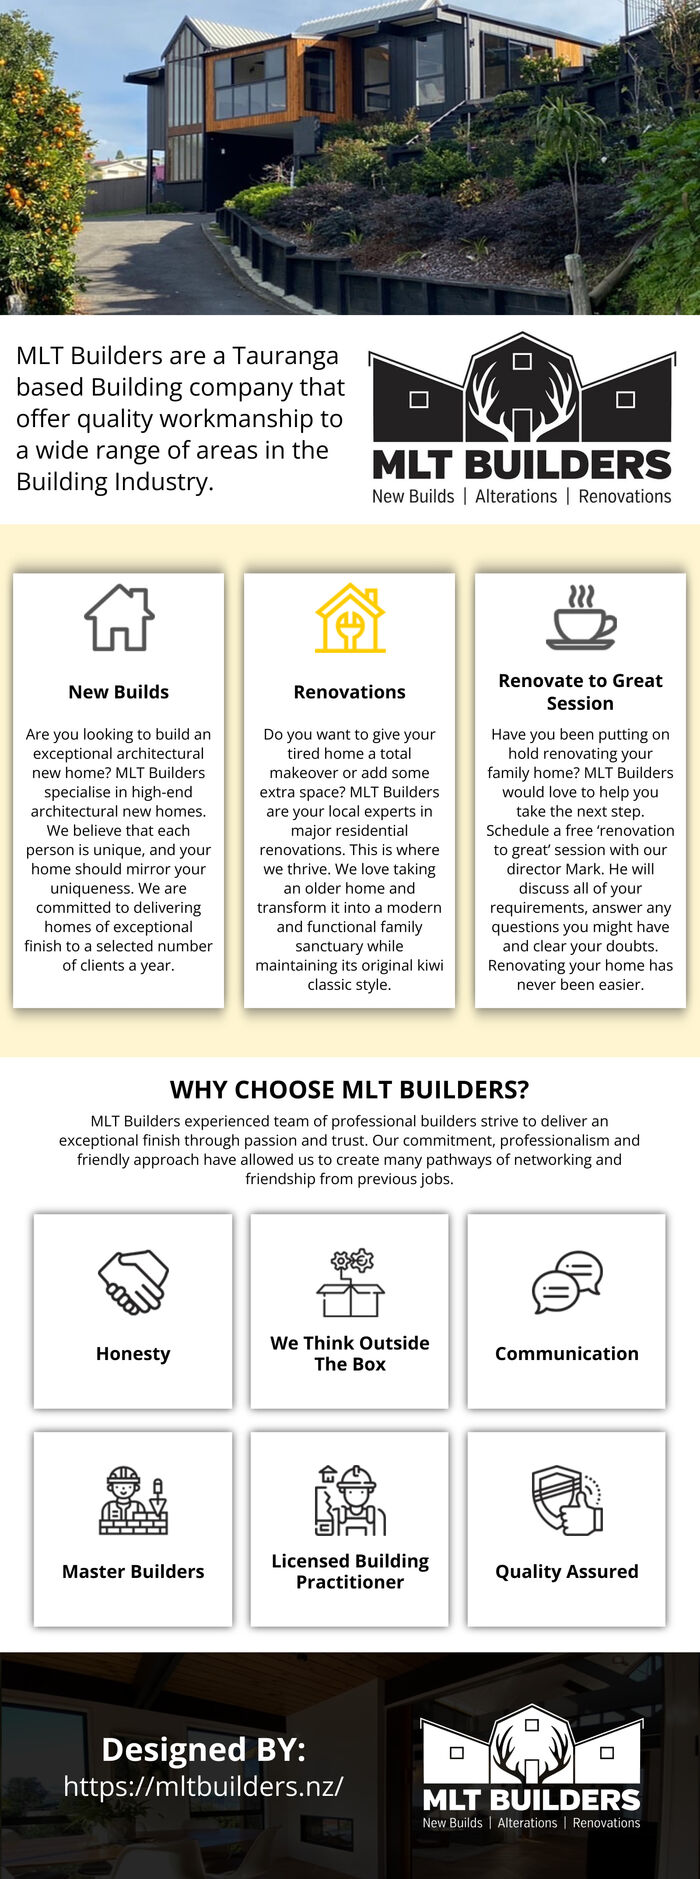 This Infographic is designed by MlT Builders